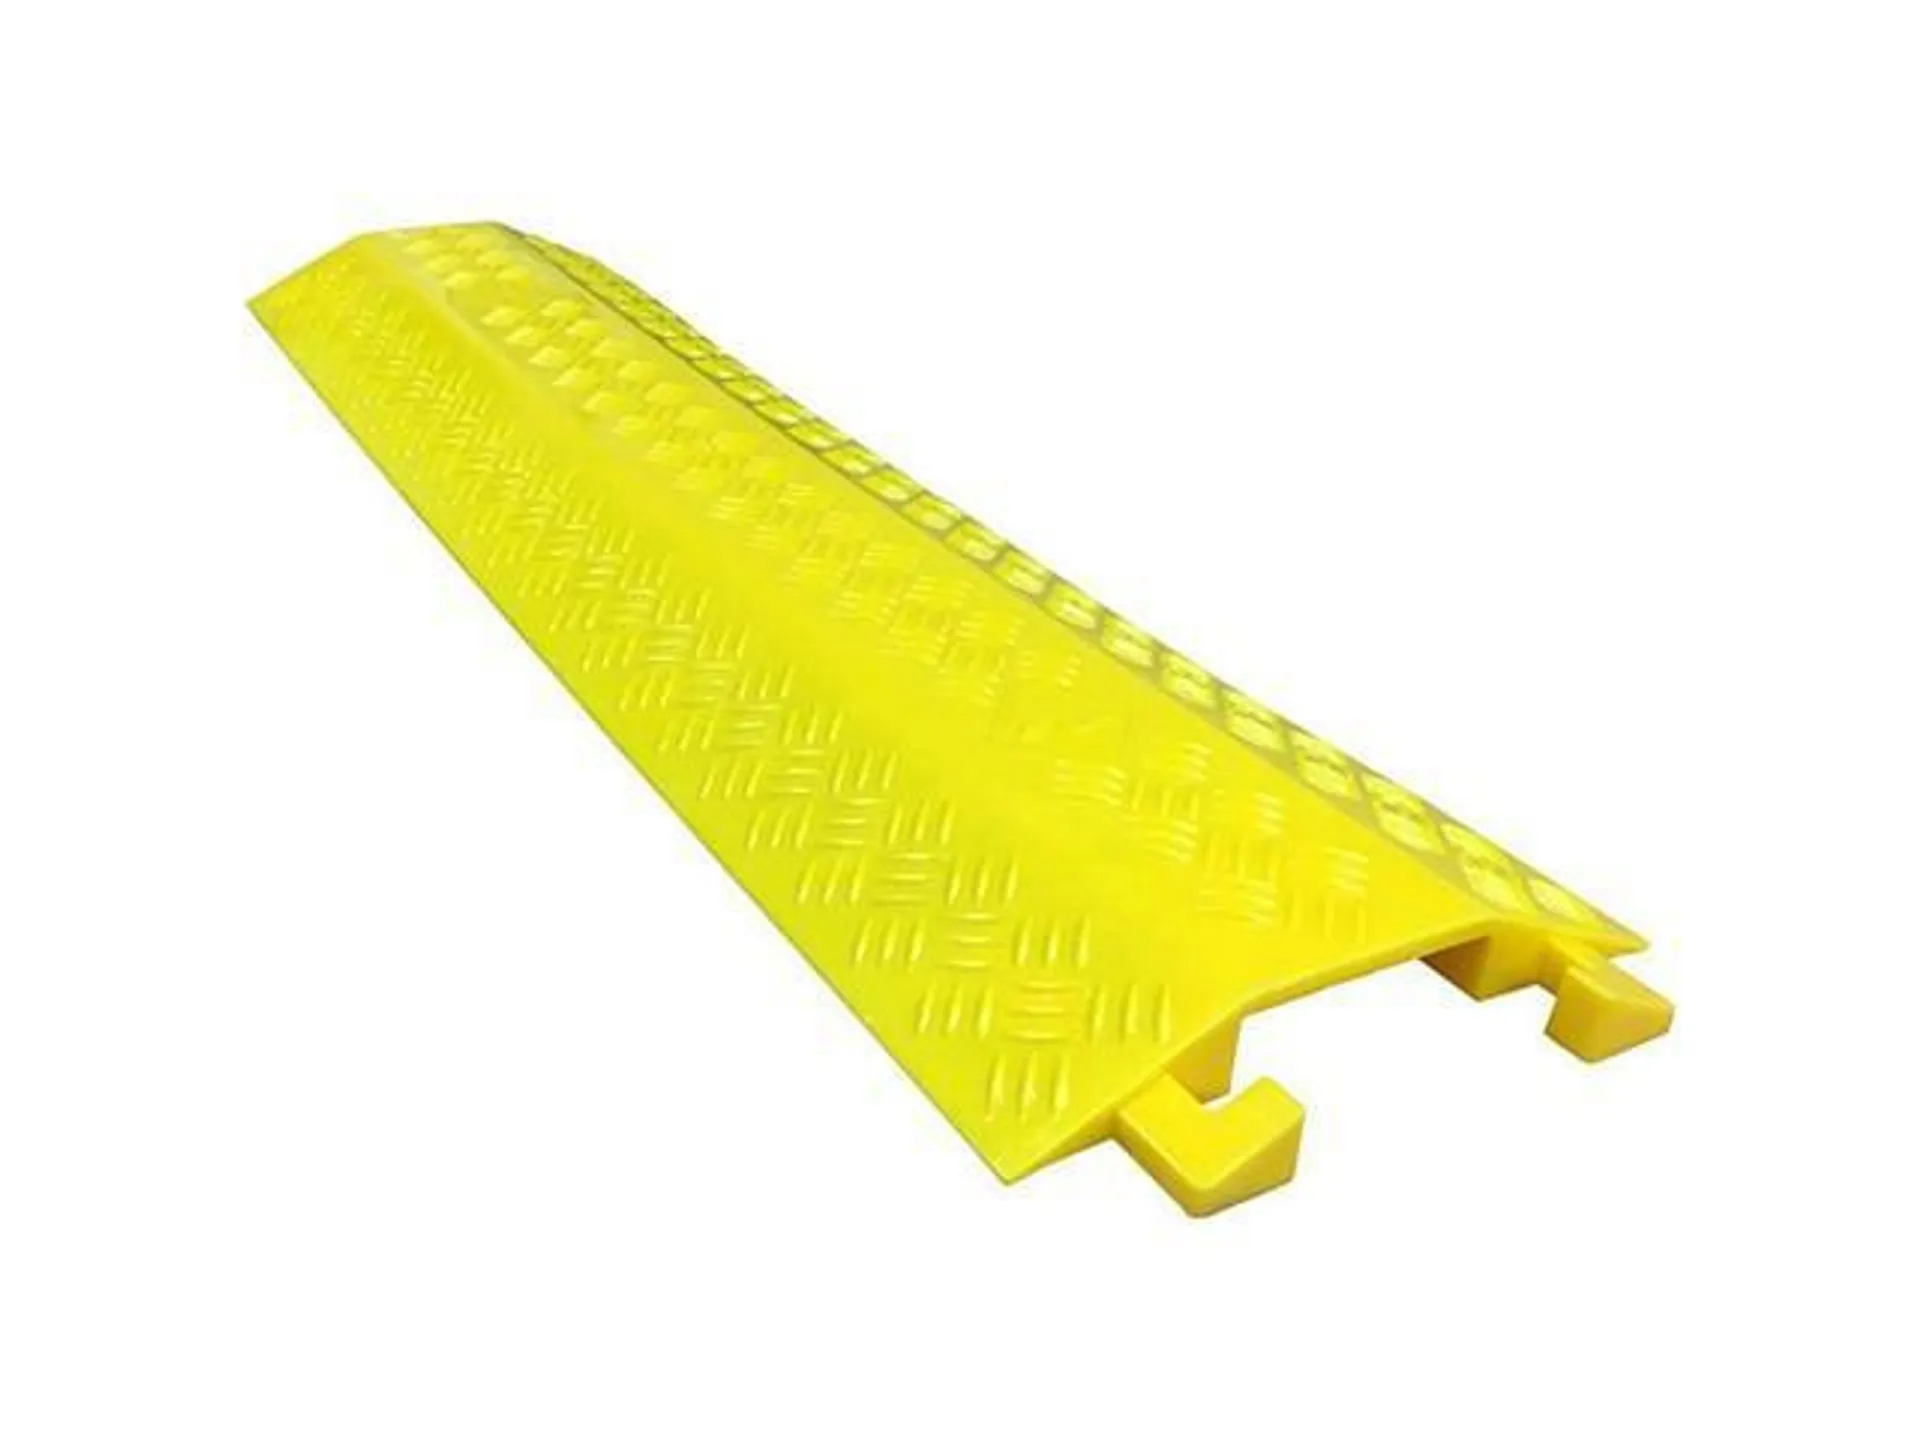 Runner PVC Drop Over Cable Ramp Cable Protector - Single Channel - Yellow